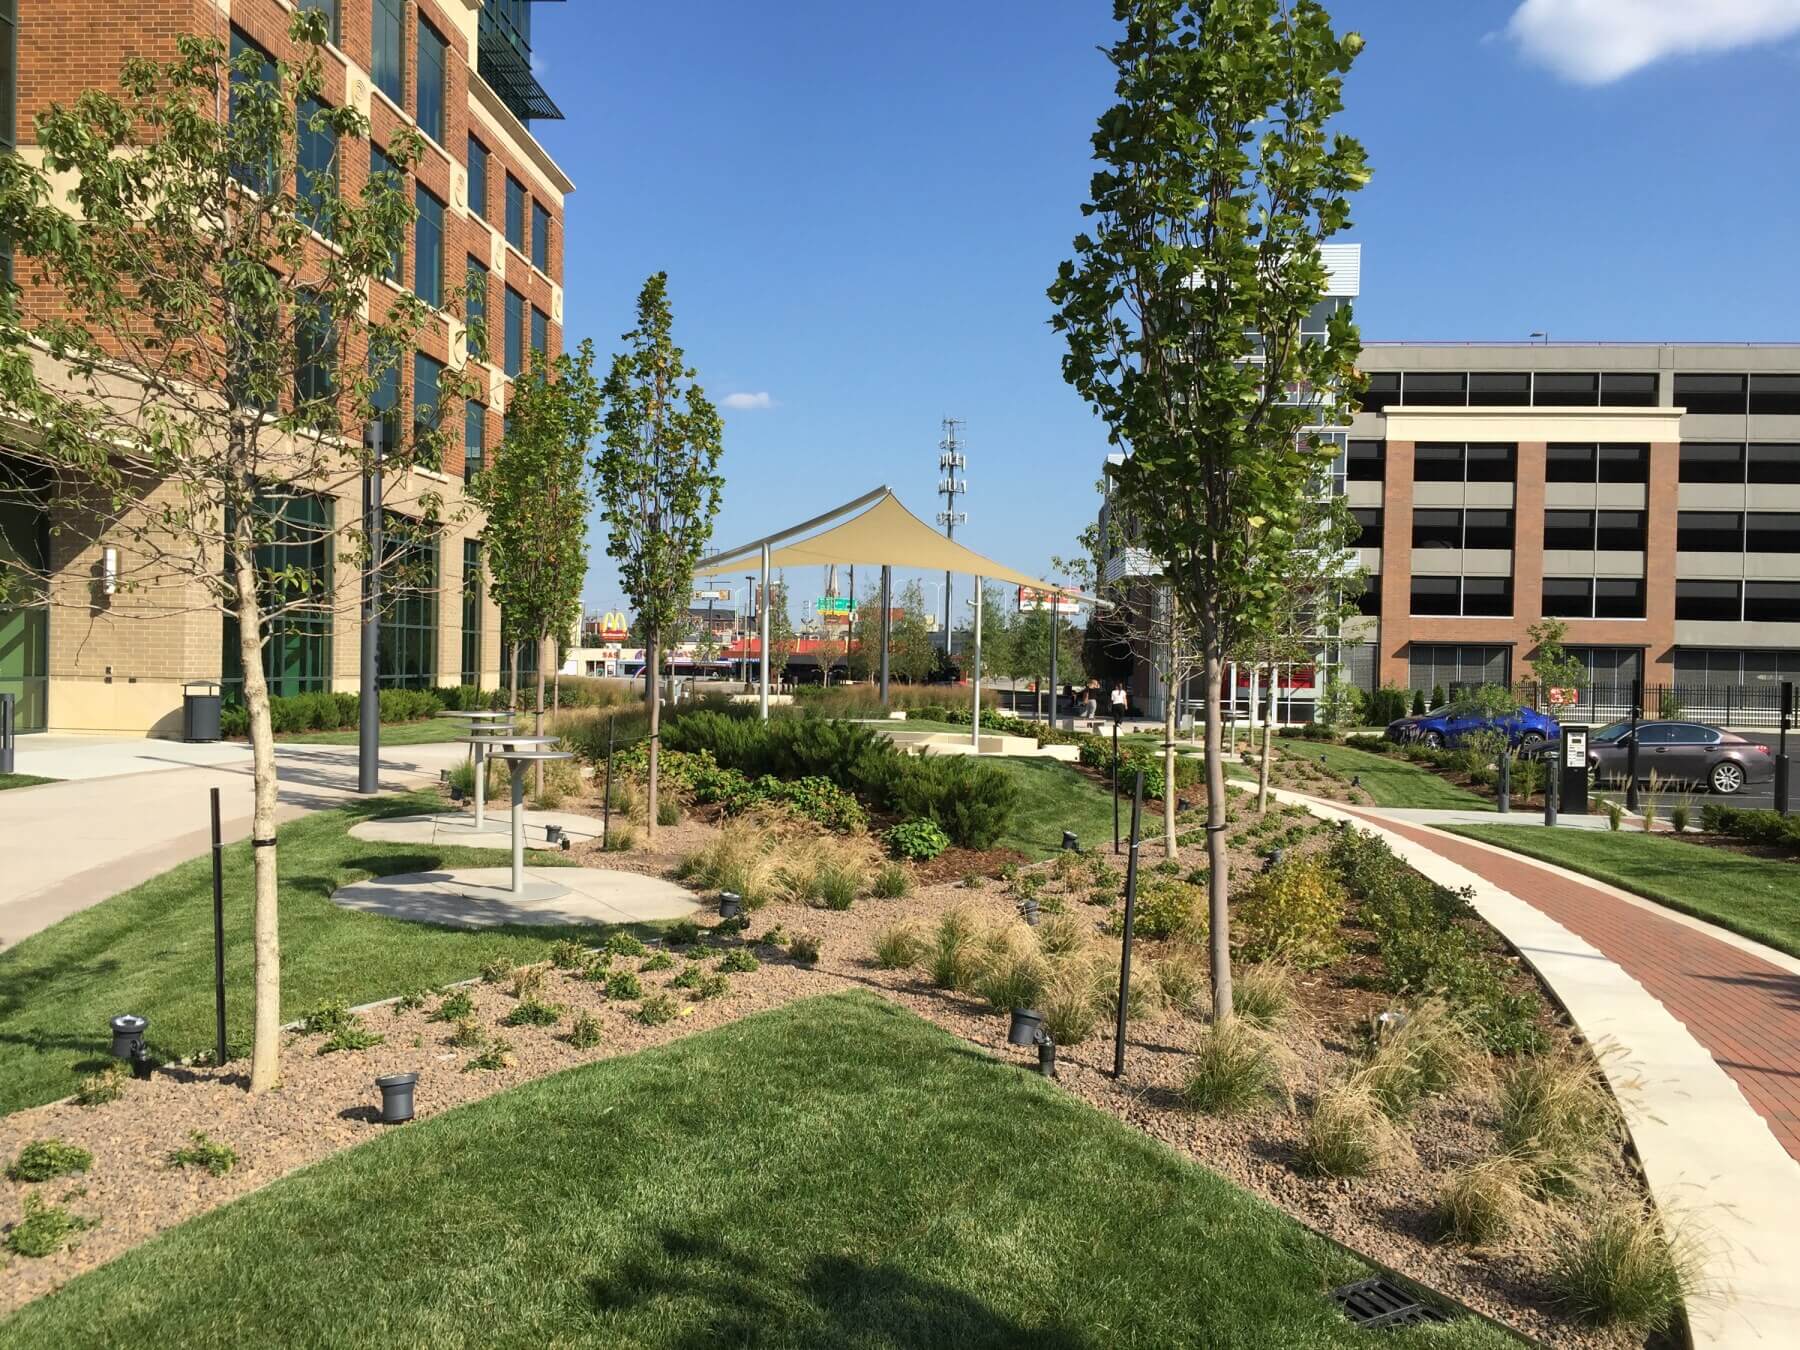 plantings, grass and trees outside of the University of Louisville’s J.D. Nichols Campus Plaza